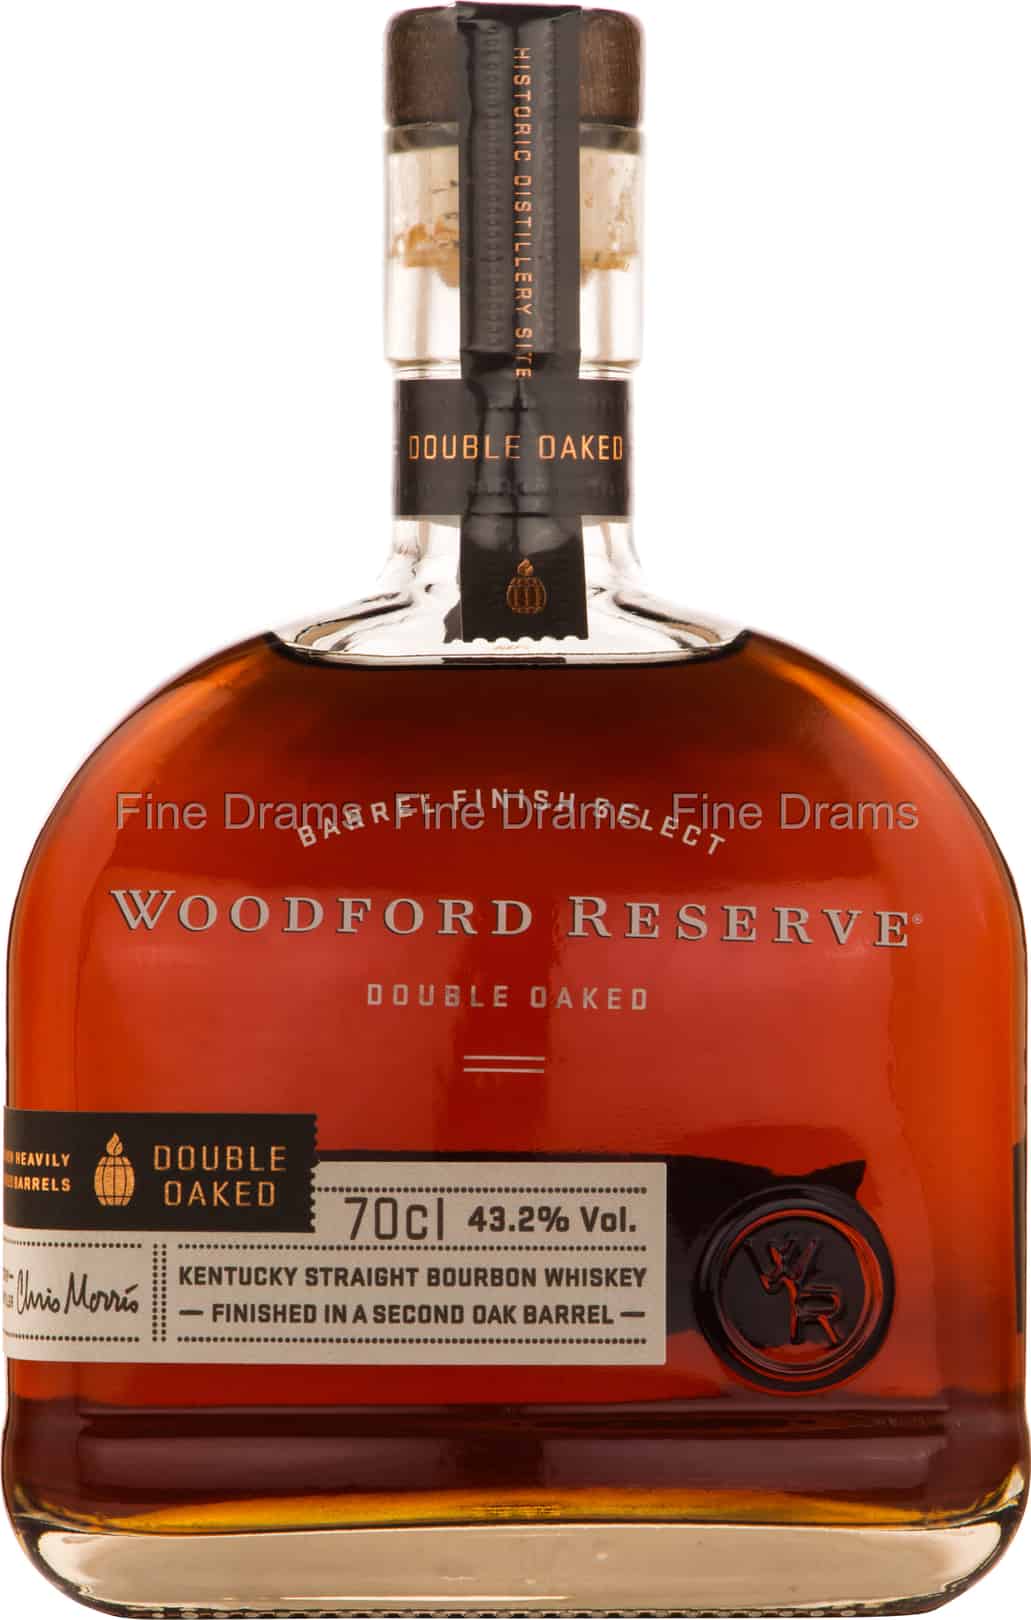 Woodford Reserve Bourbon Whisky, 70 cl